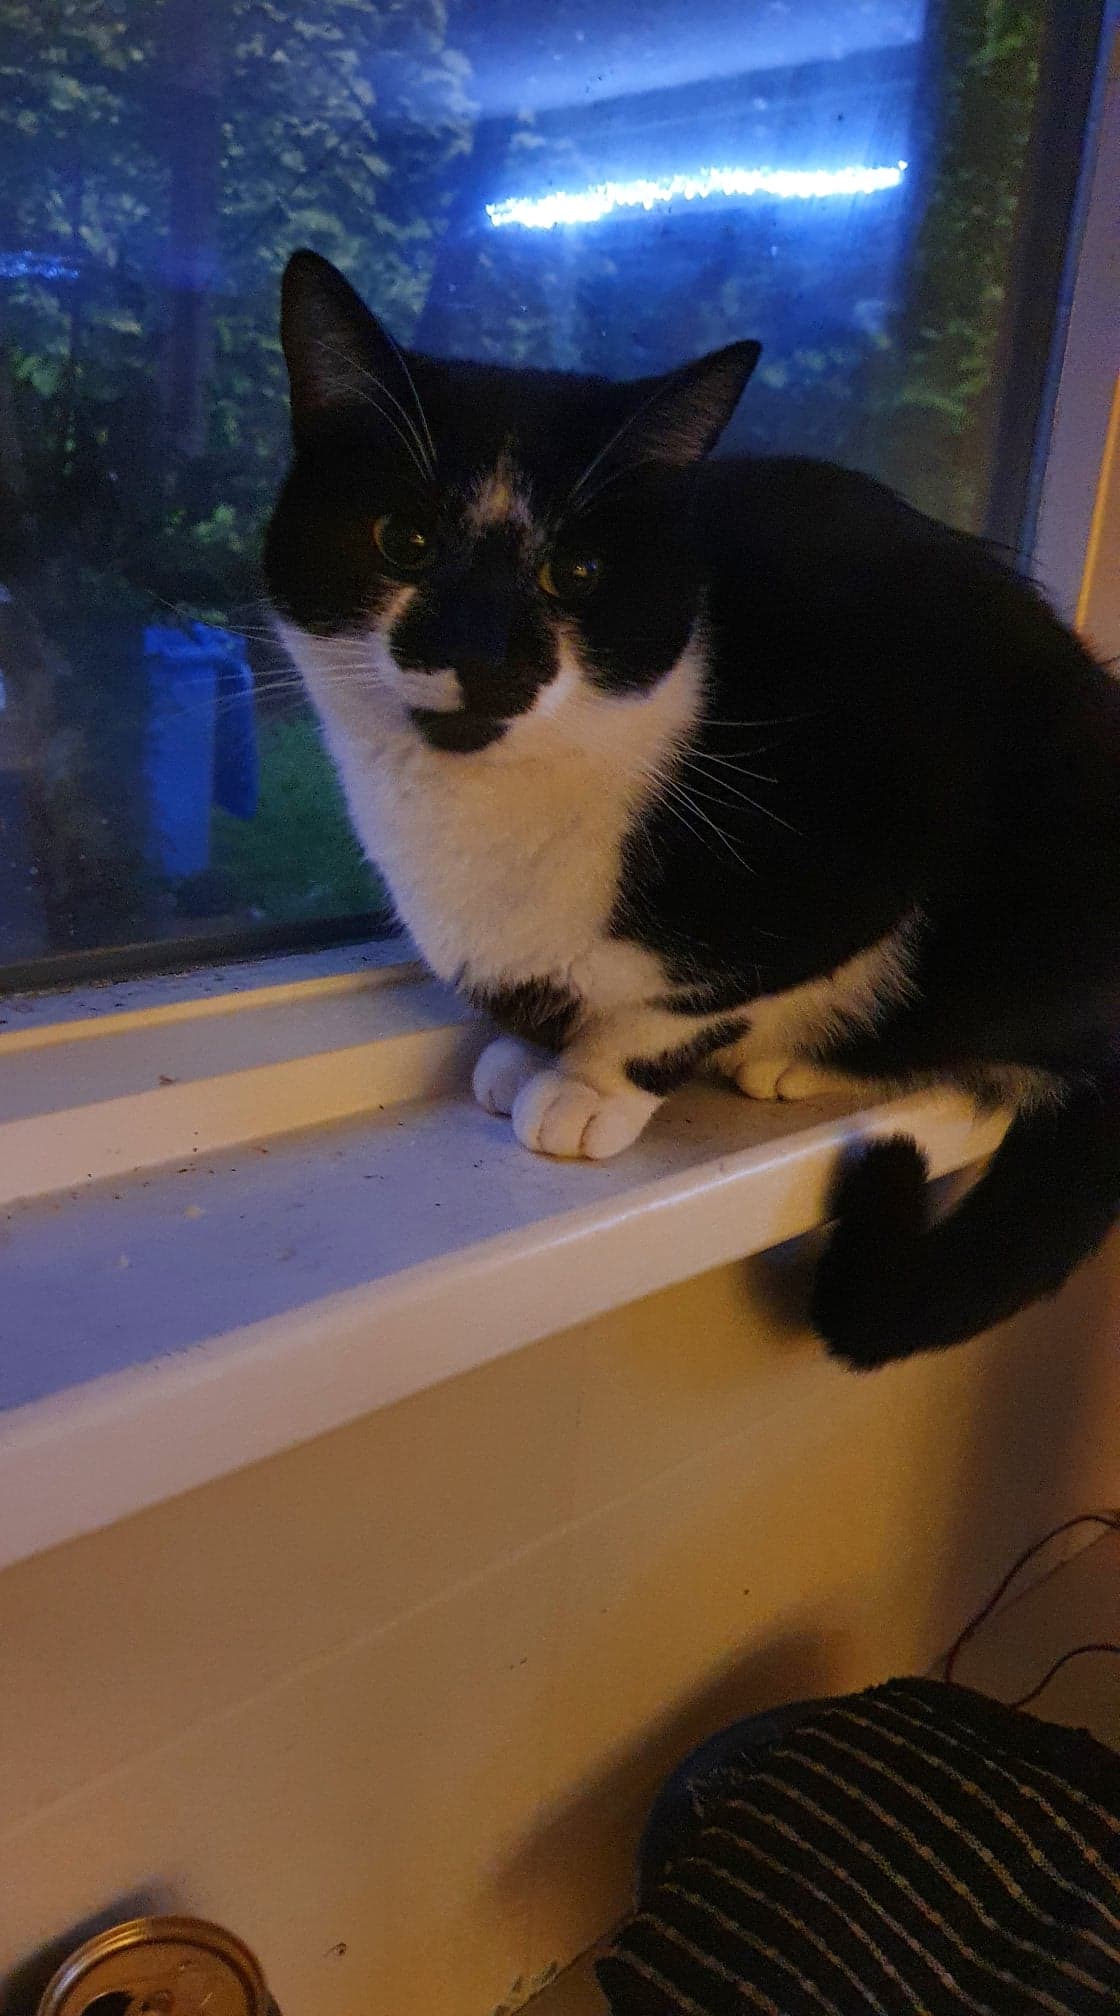 Pet owner stunned after ‘dead’ cat reappears at her window